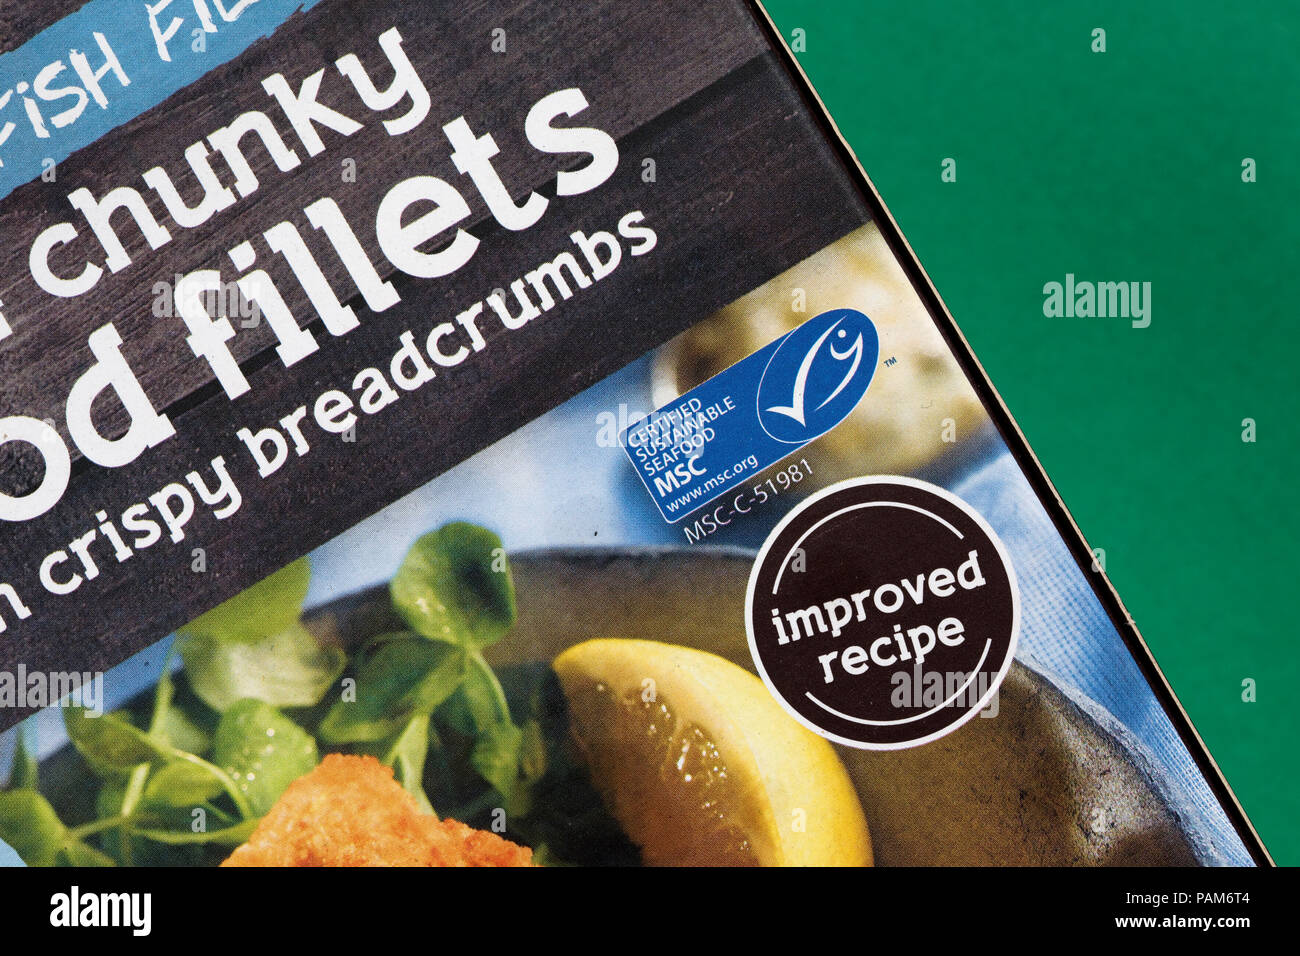 Cod fillets package with MSC certified sustainable food logo UK Stock Photo